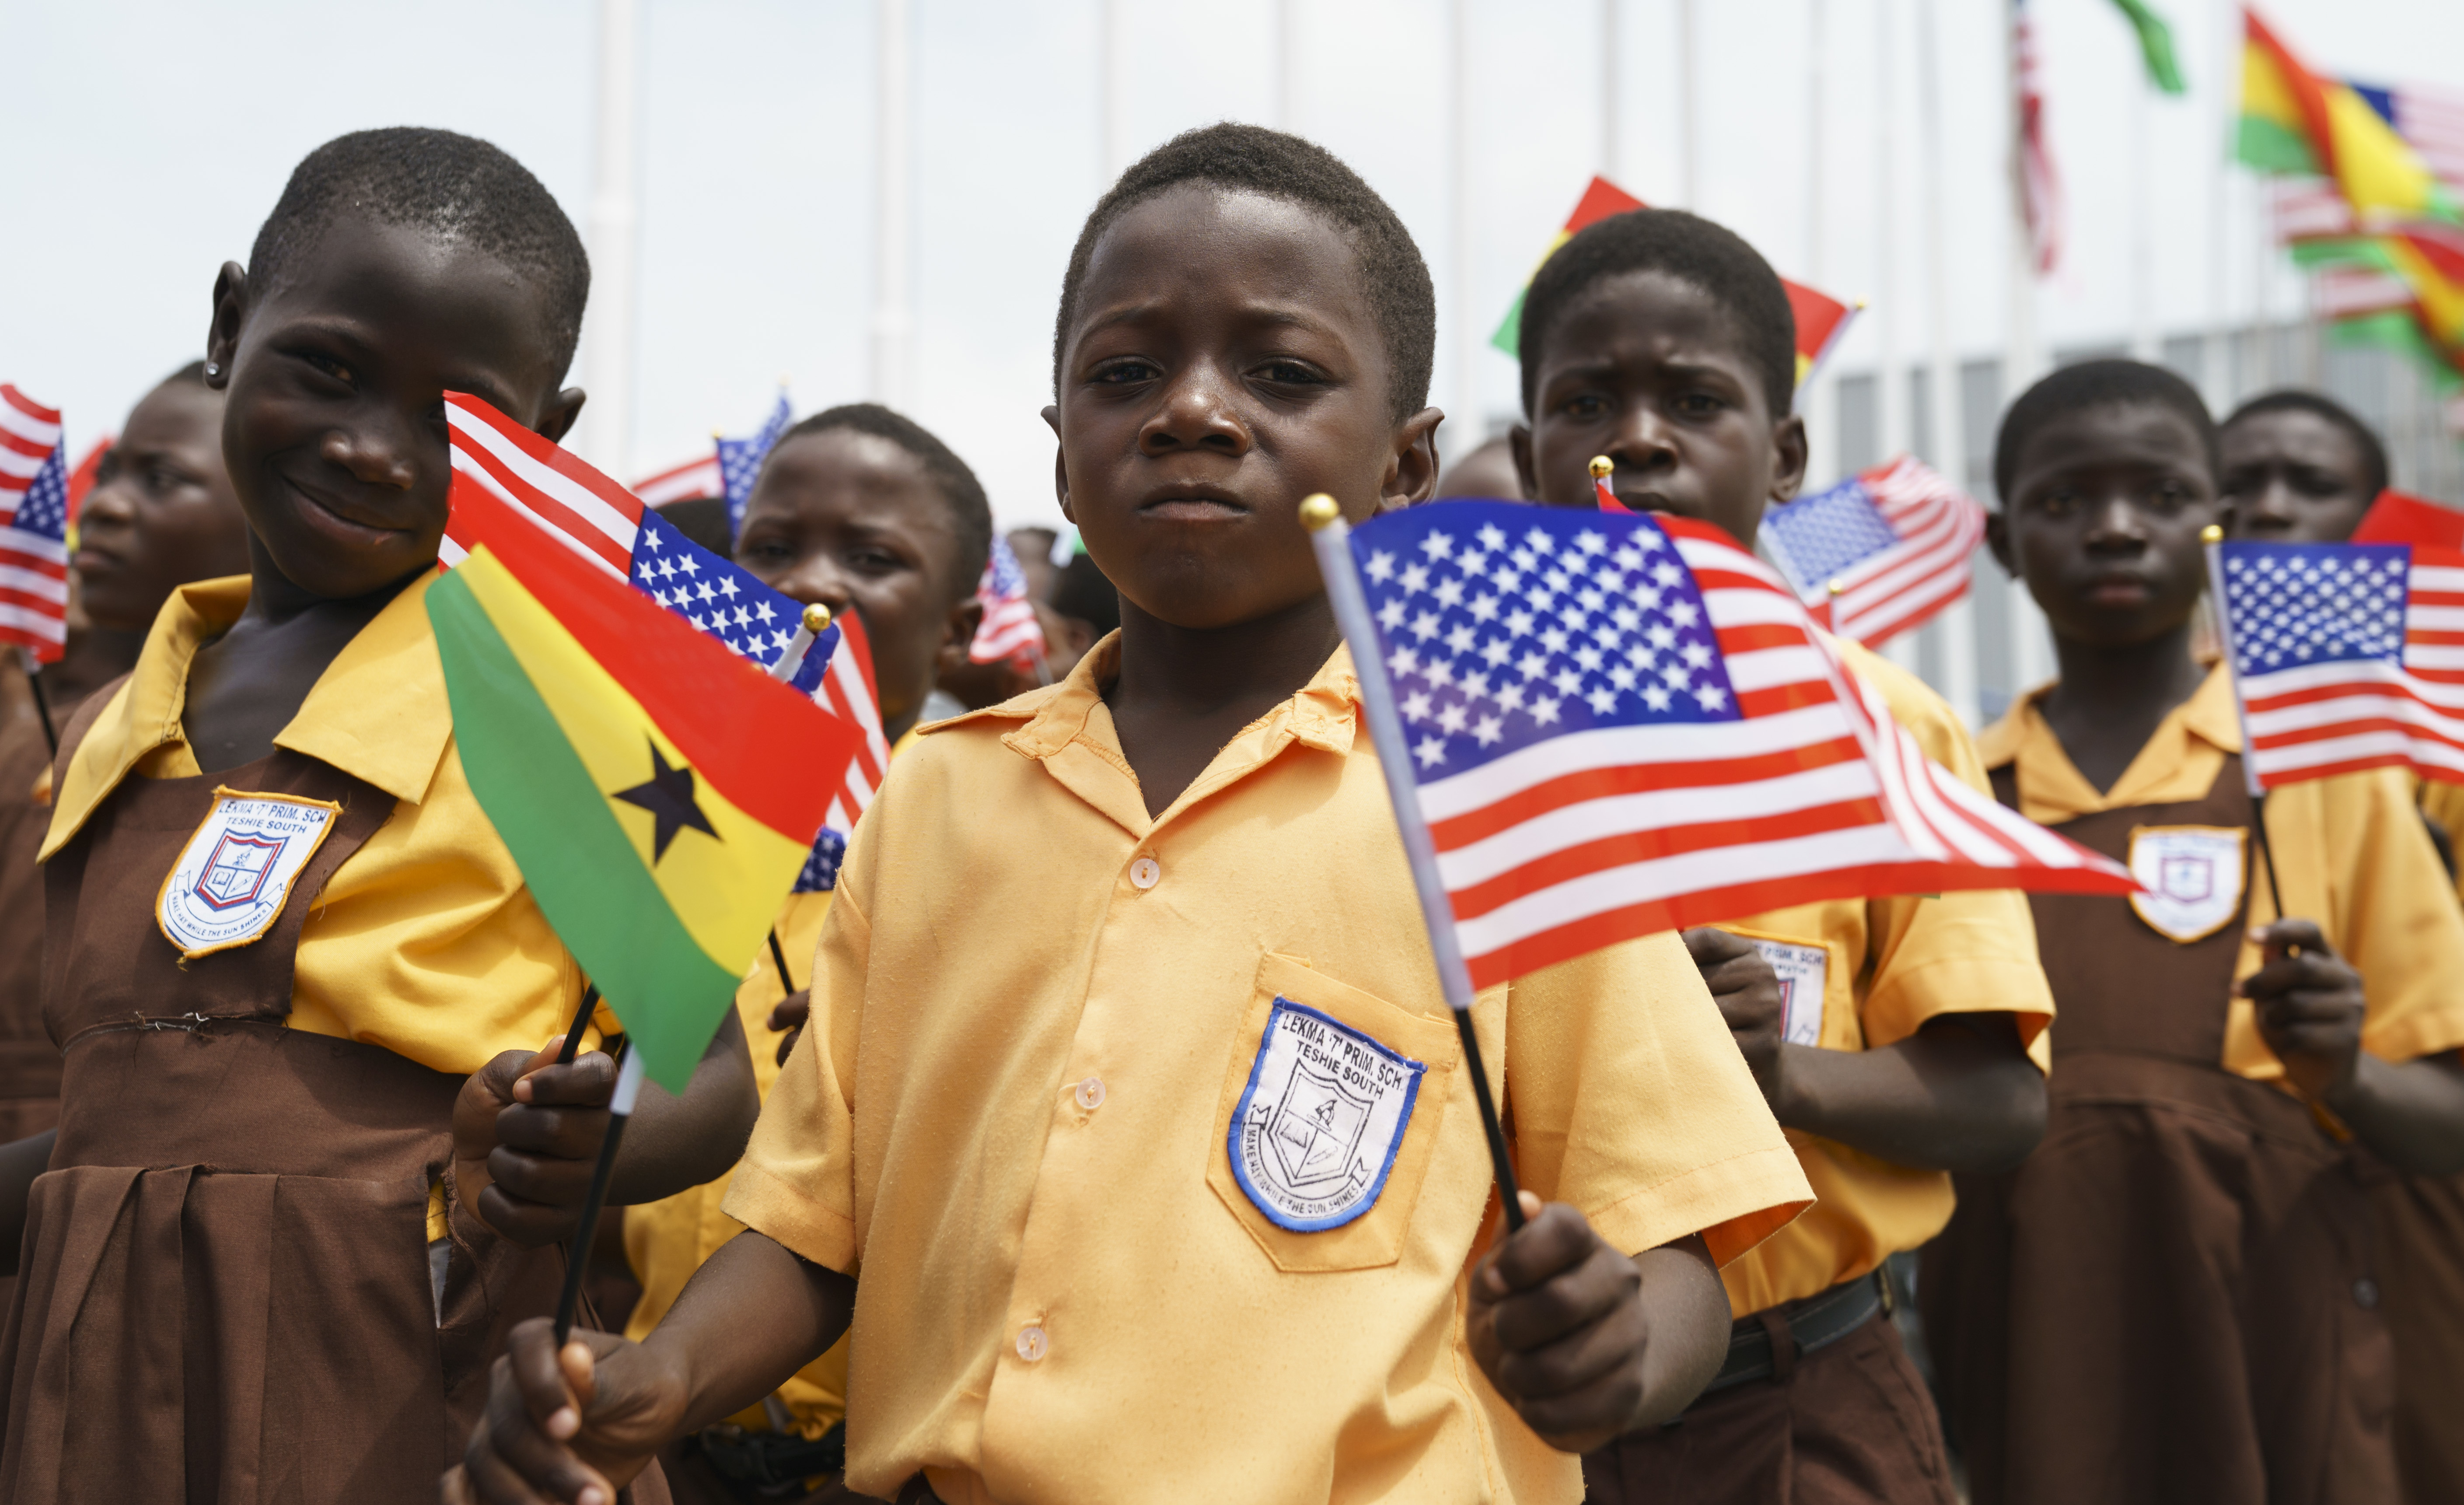 Children wave American and Ghana flags during an arrival ceremony for first lady Melania Trump 